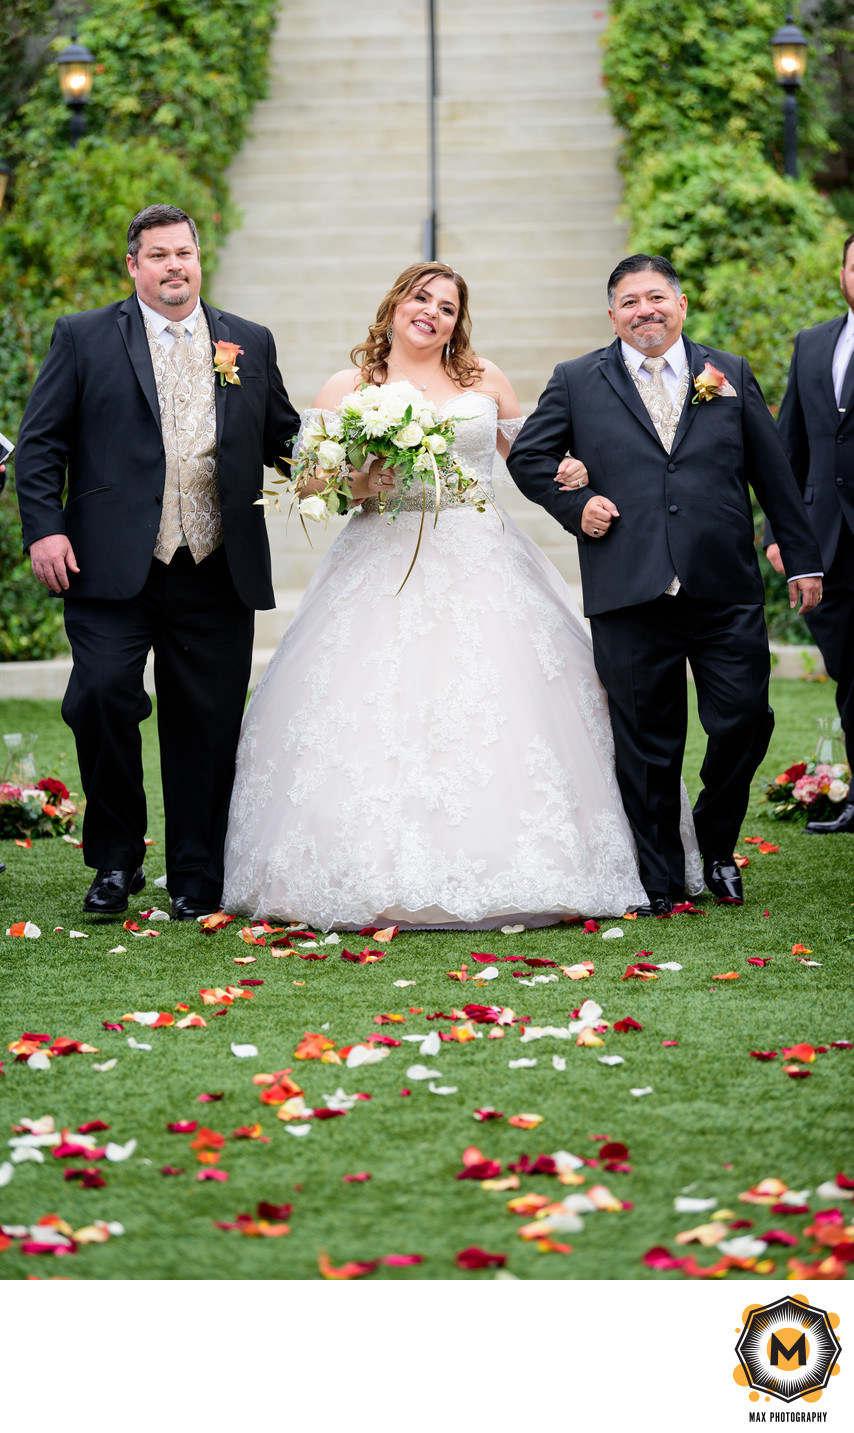 Wedding Ceremony at Kendall Plantation in Boerne, Texas